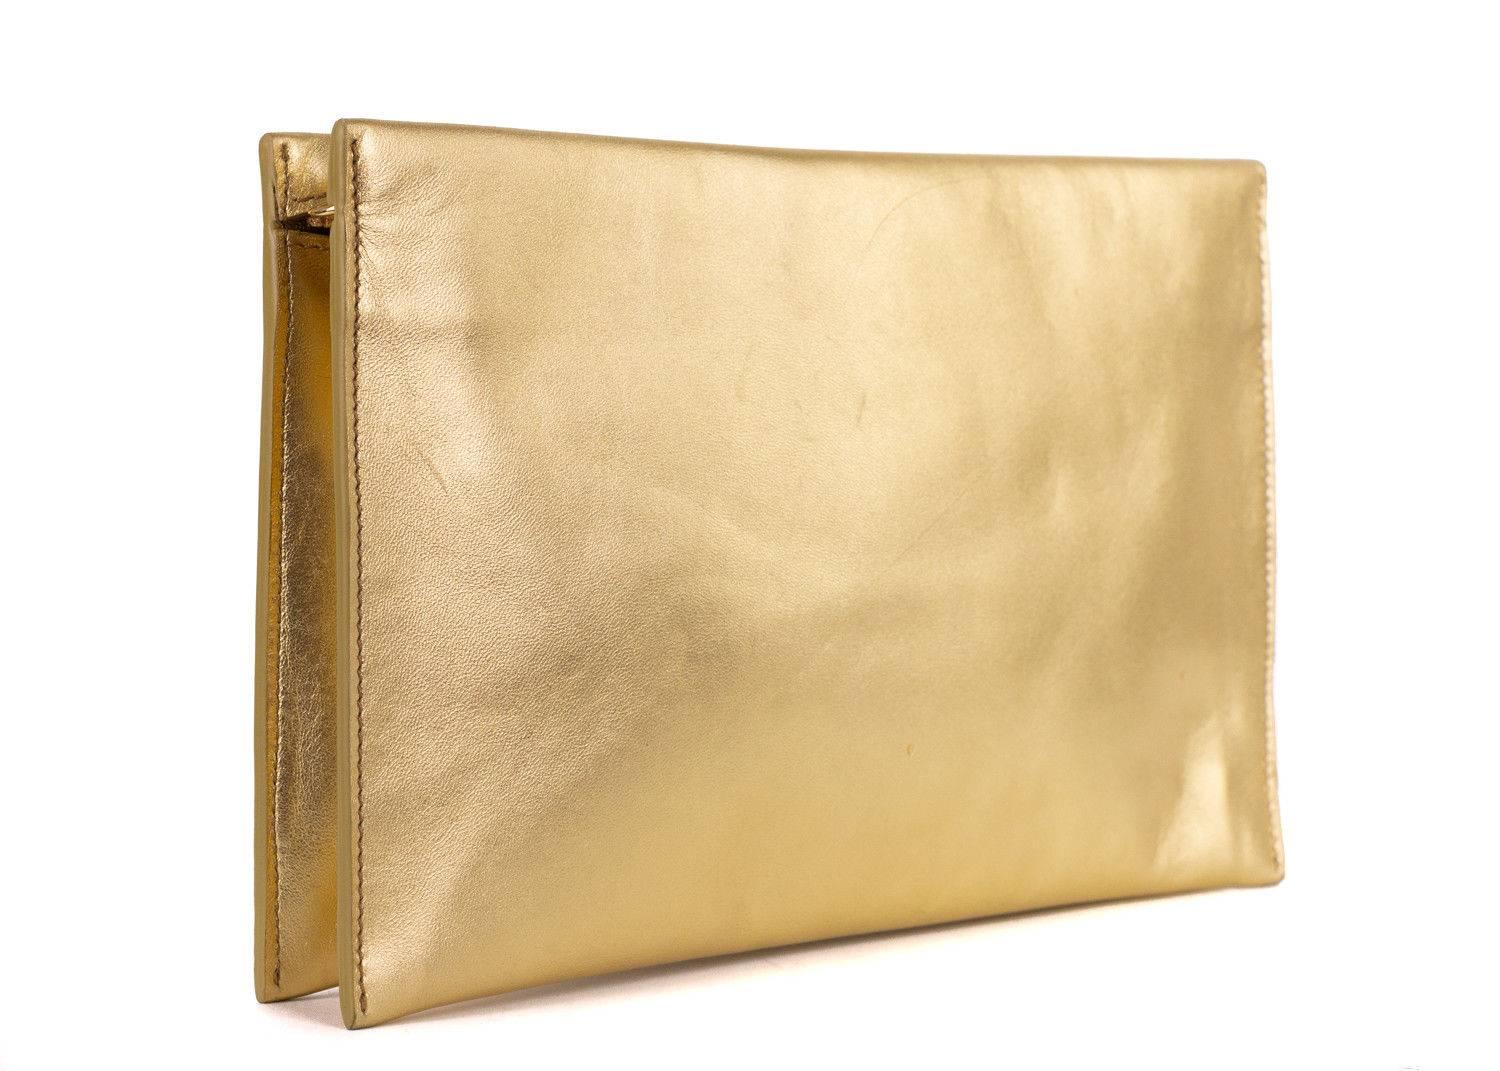 Roberto Cavalli Solid Gold Metallic Grained Leather Zip Clutch In New Condition For Sale In Brooklyn, NY